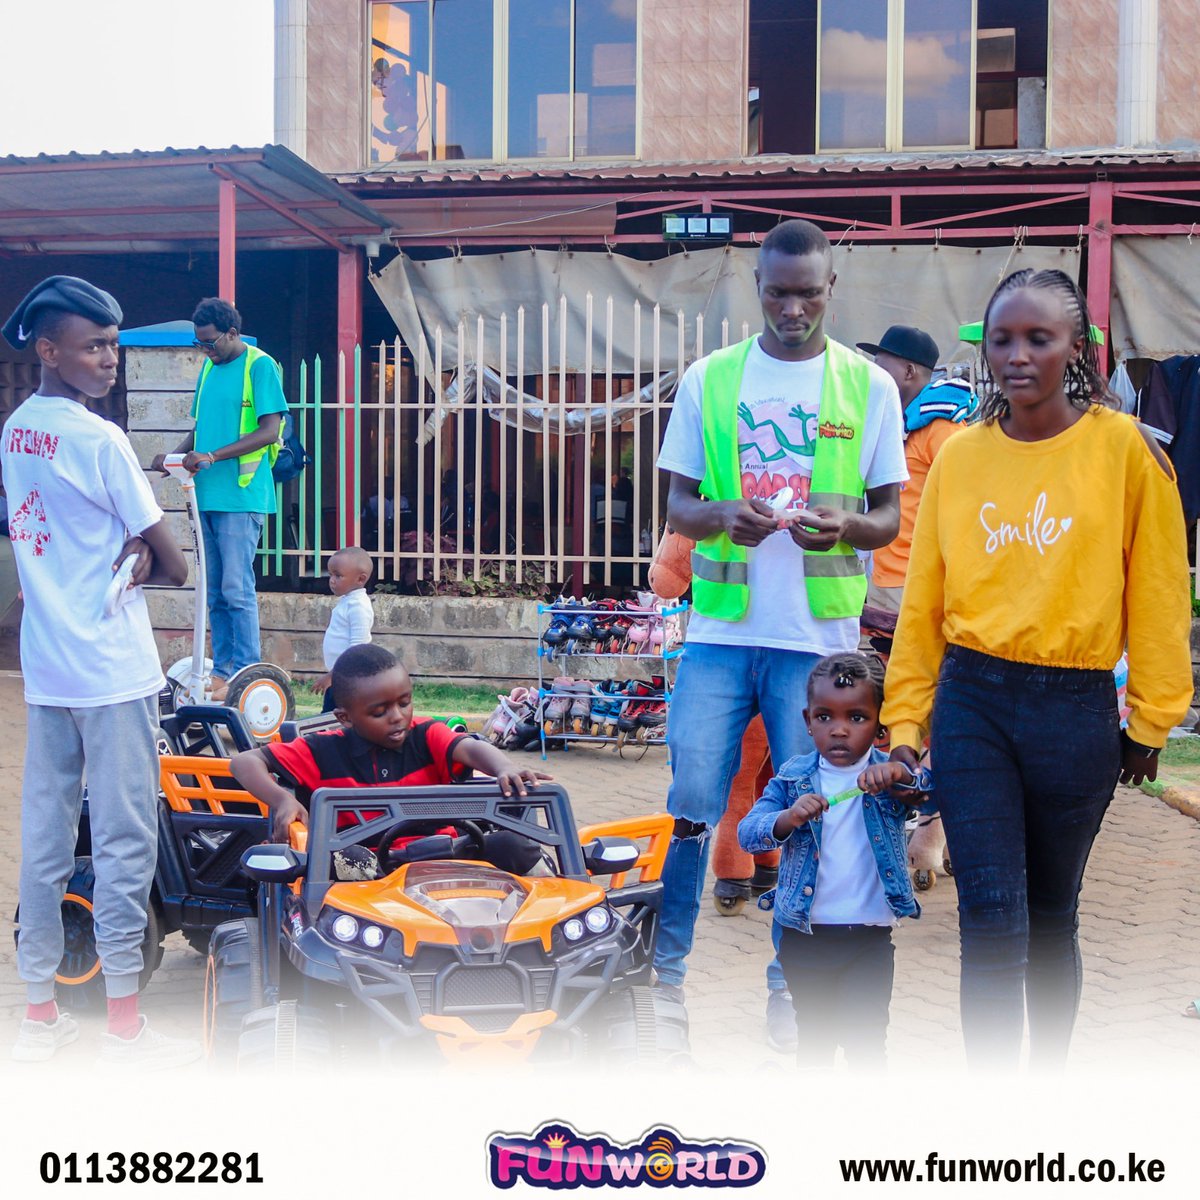 Have a Fun-tastic Tuesday.
#FunworldAmusementPark.
Find us at Juja City Mall Complex (Behind Naivas), Along Thika Superhighway on Exit 14

Contact us on +254 113 882 281.
Email: info@funworld.co.ke 
Website: funworld.co.ke 
#FunworldAmusementpark #TheFunworldExperience